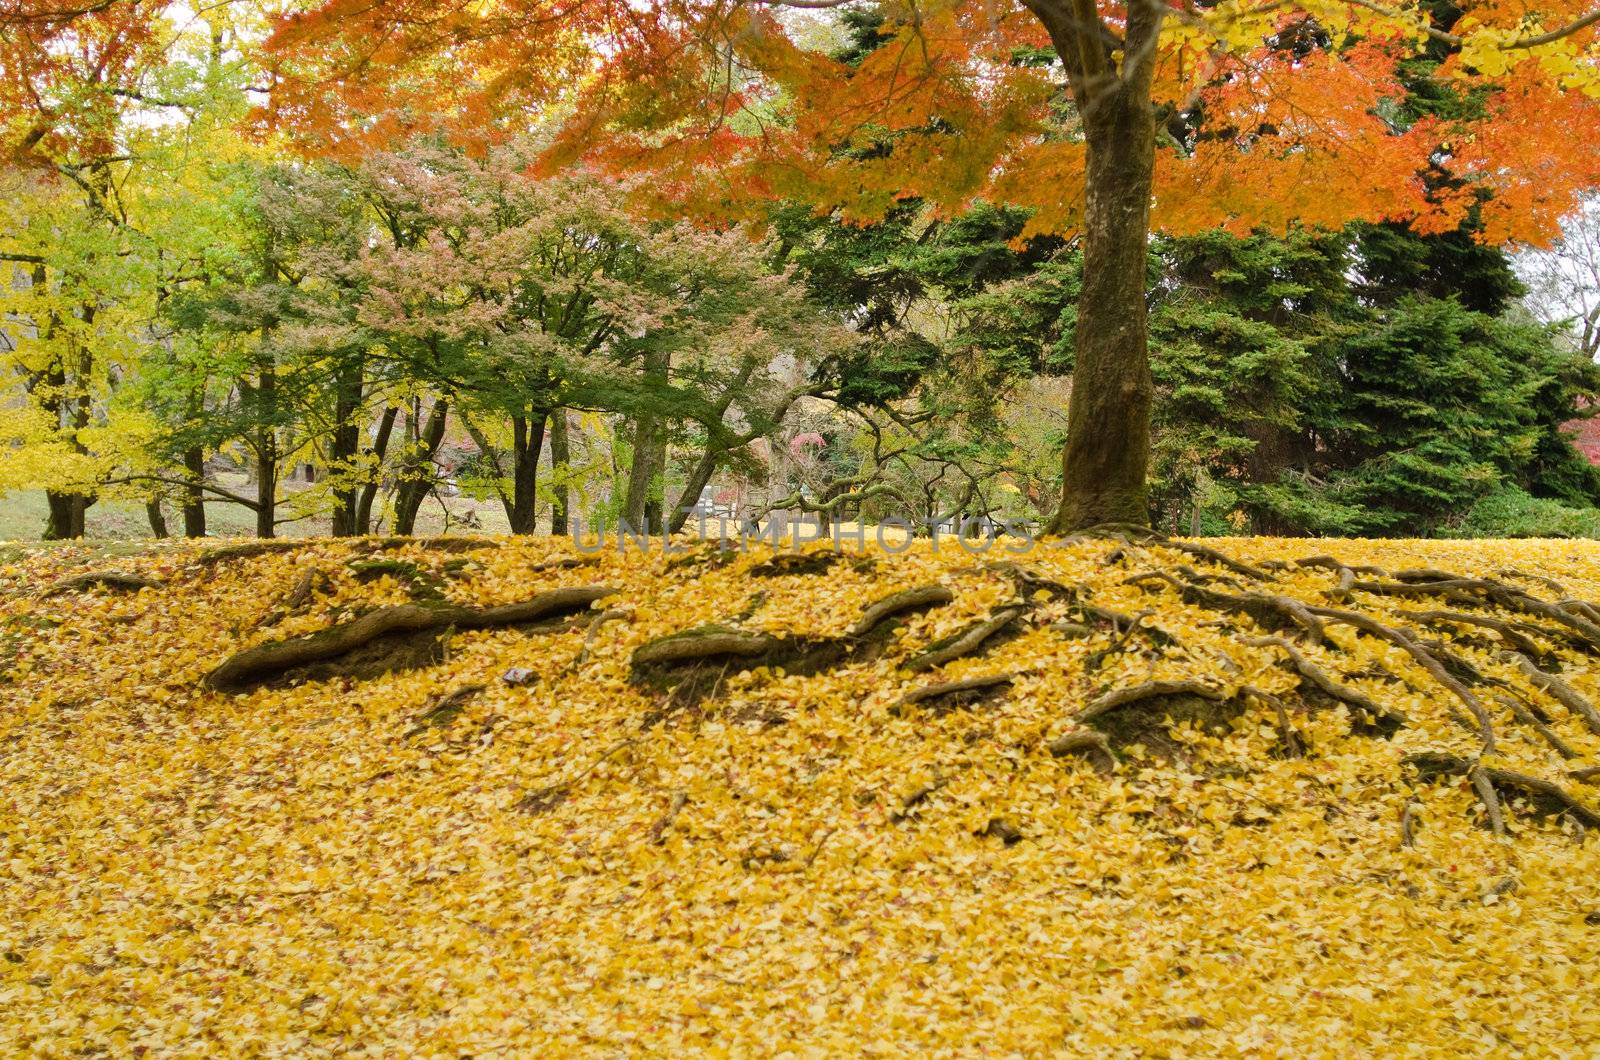 Japanese maple tree in autumn with yellow ginkgo leaves on forest floor